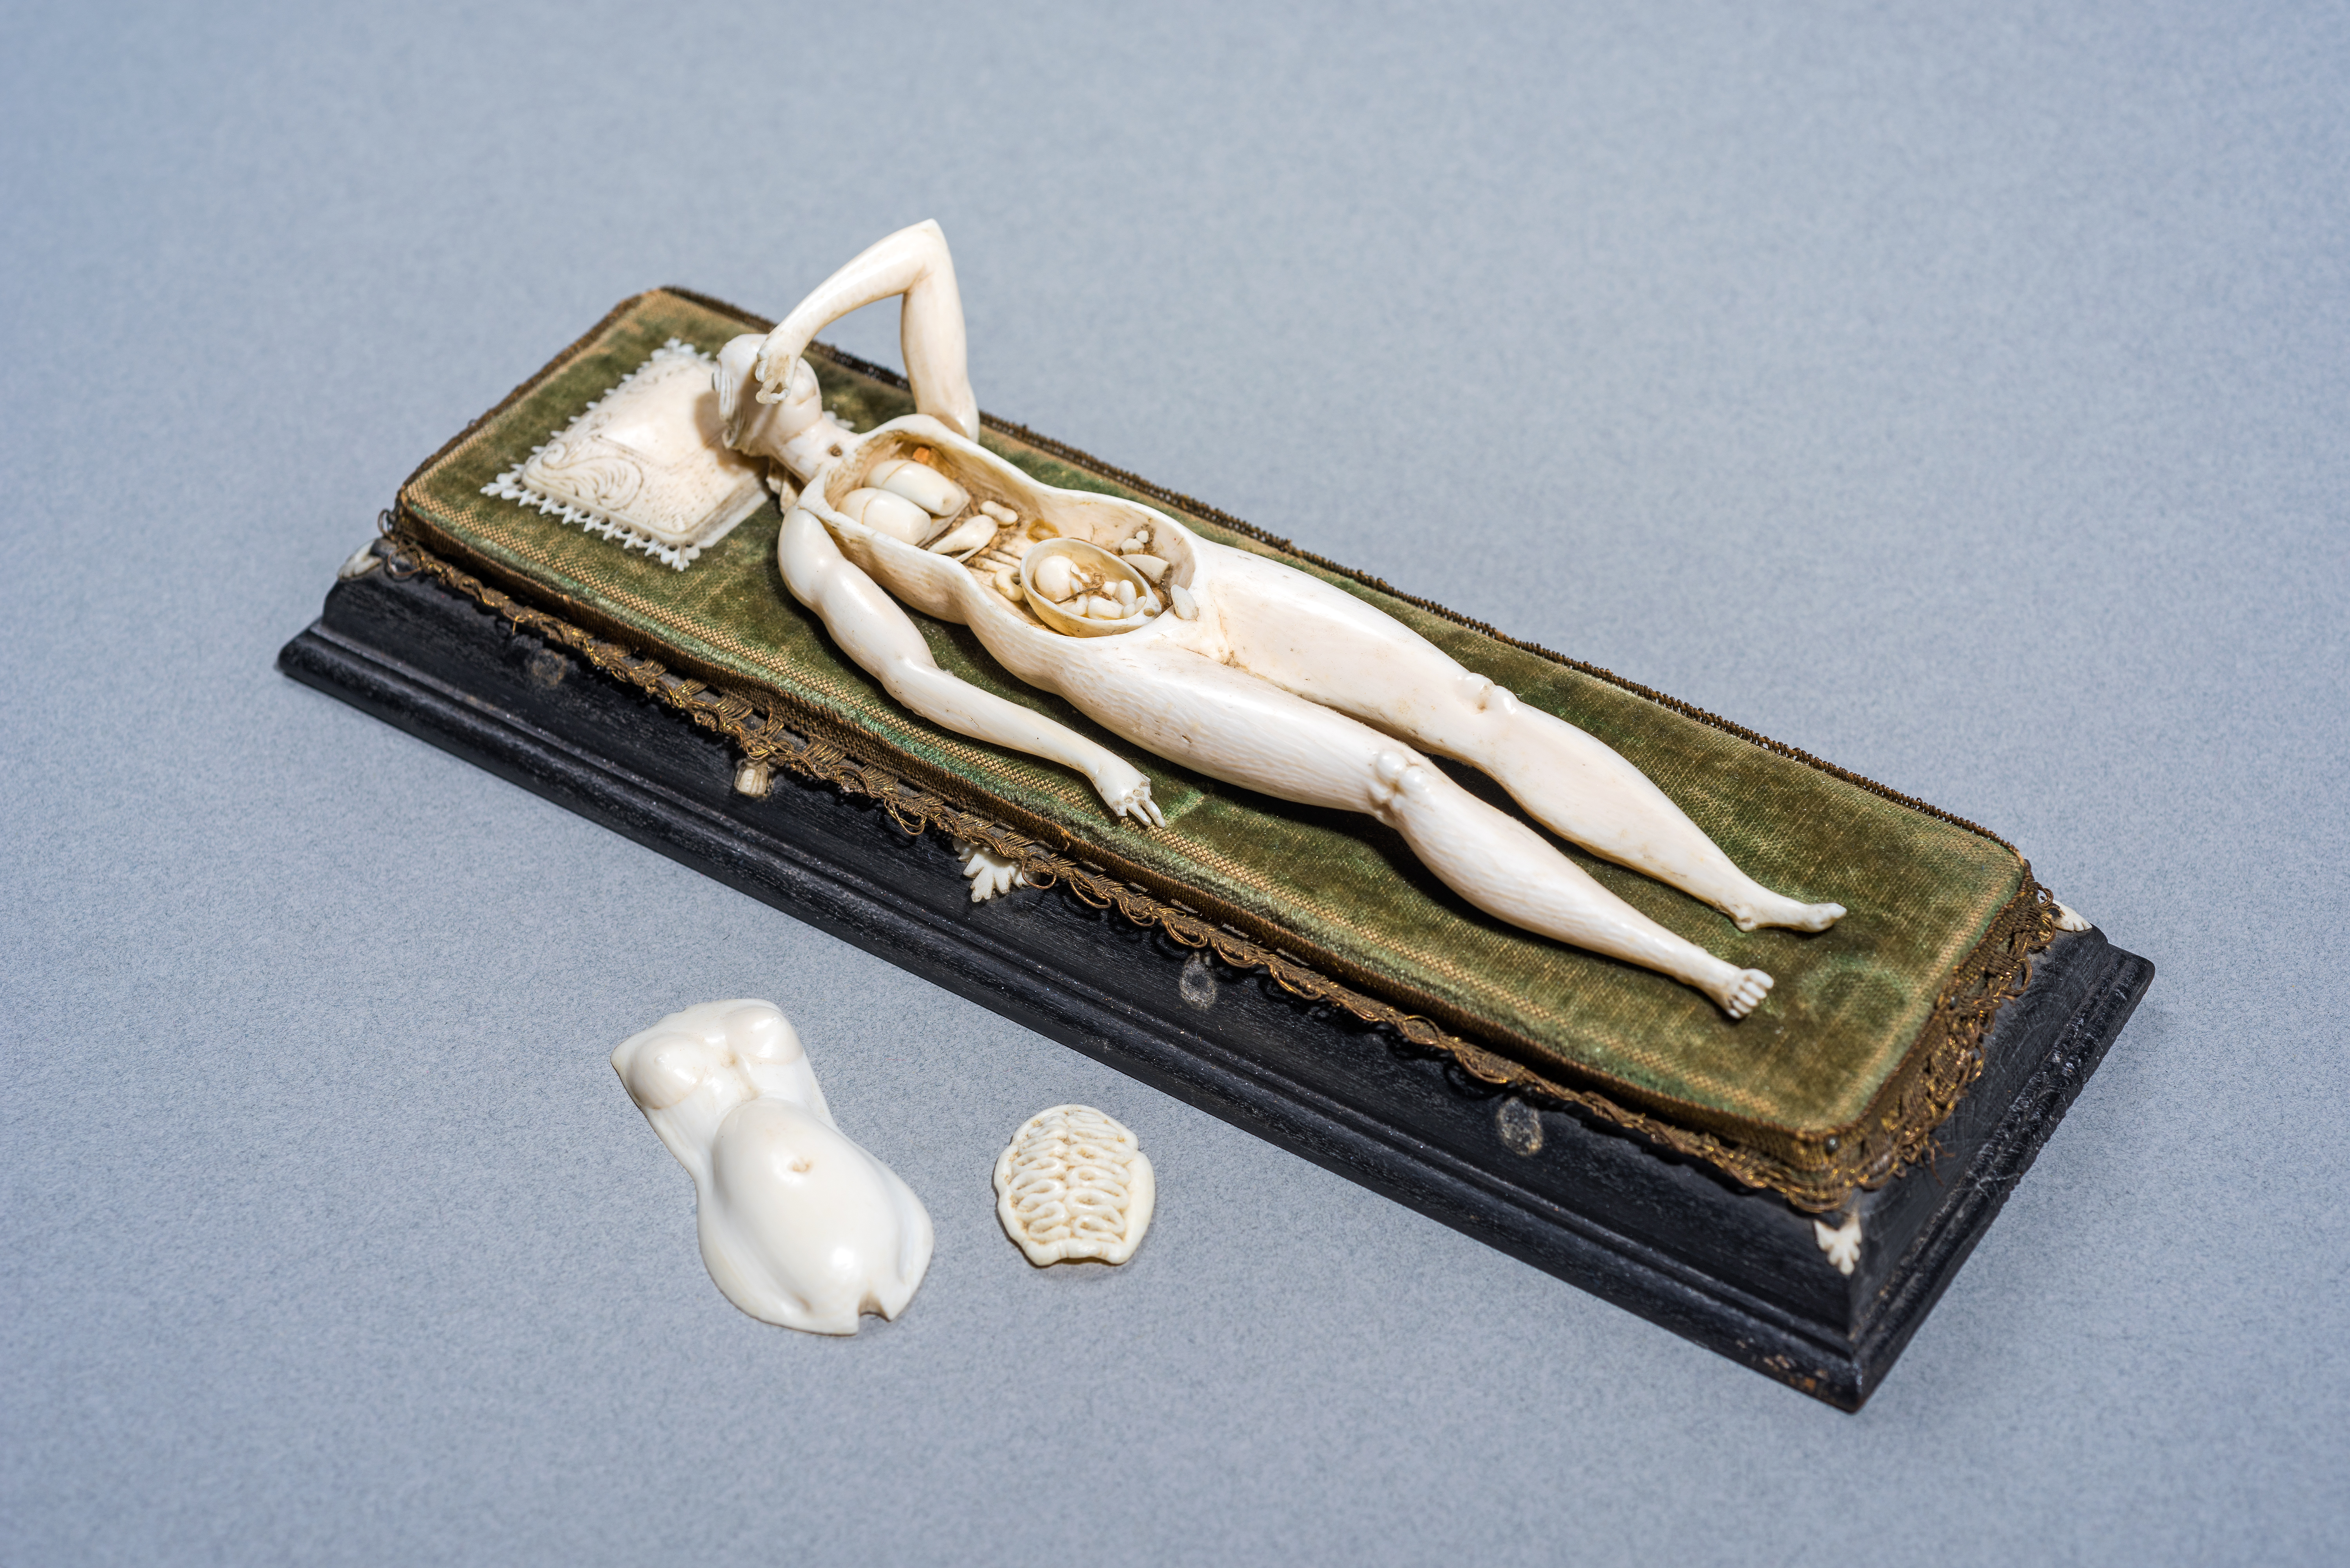 Piece of the Past Ivory anatomical model DSC_1986 final byKevinSchindler